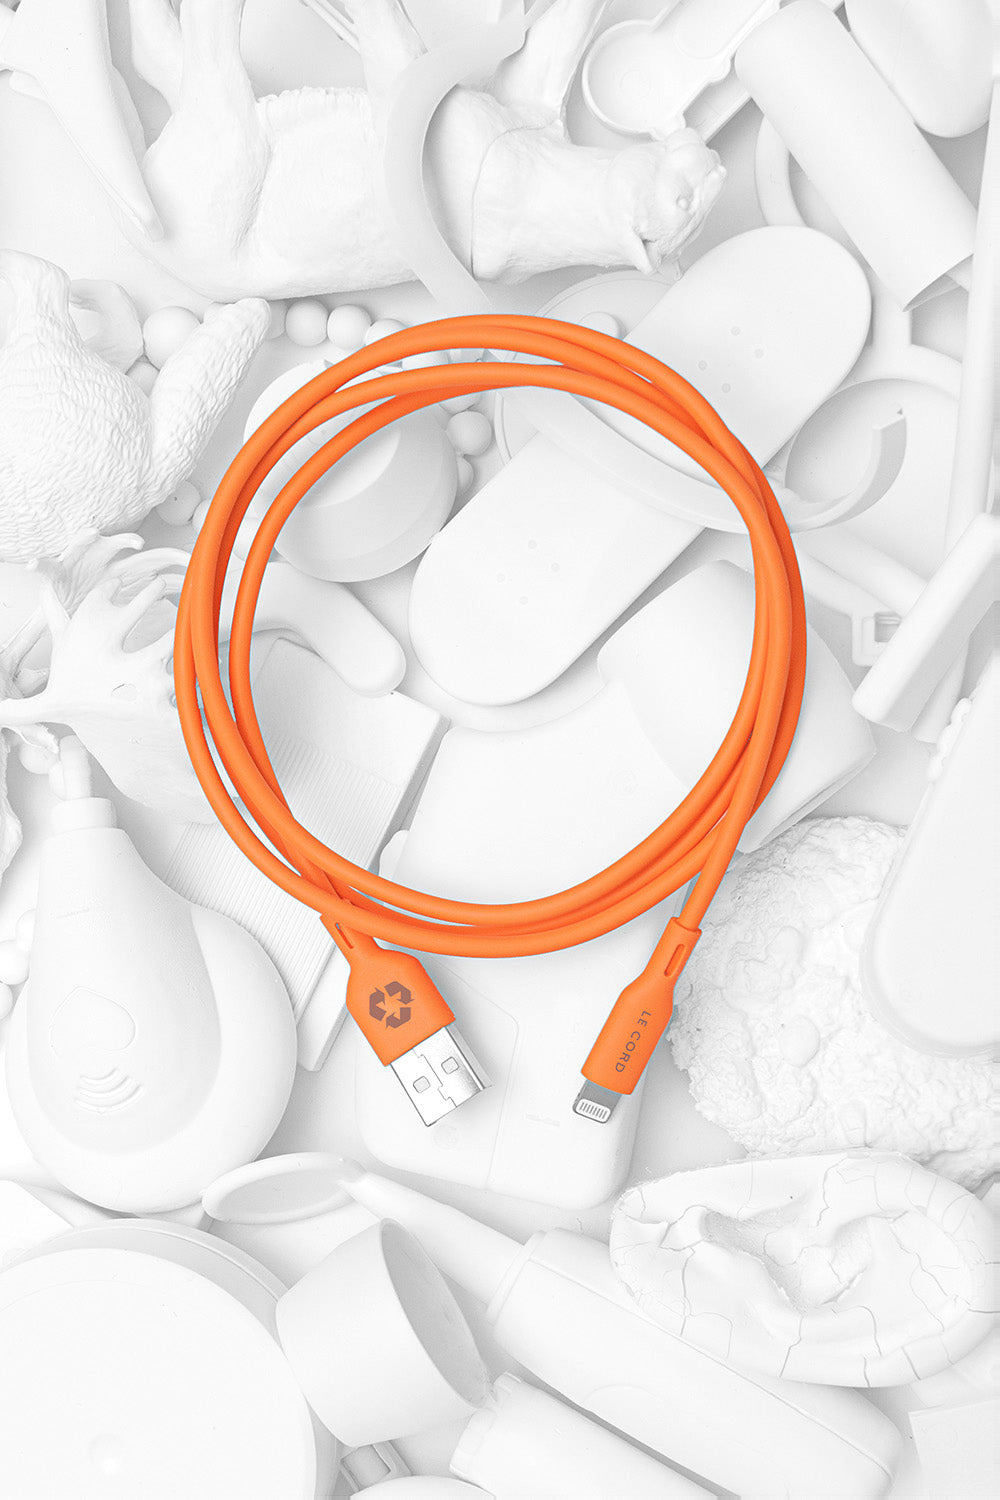 Sunset iPhone Lightning cable · 1.2 meter · Made of recycled plastics-1